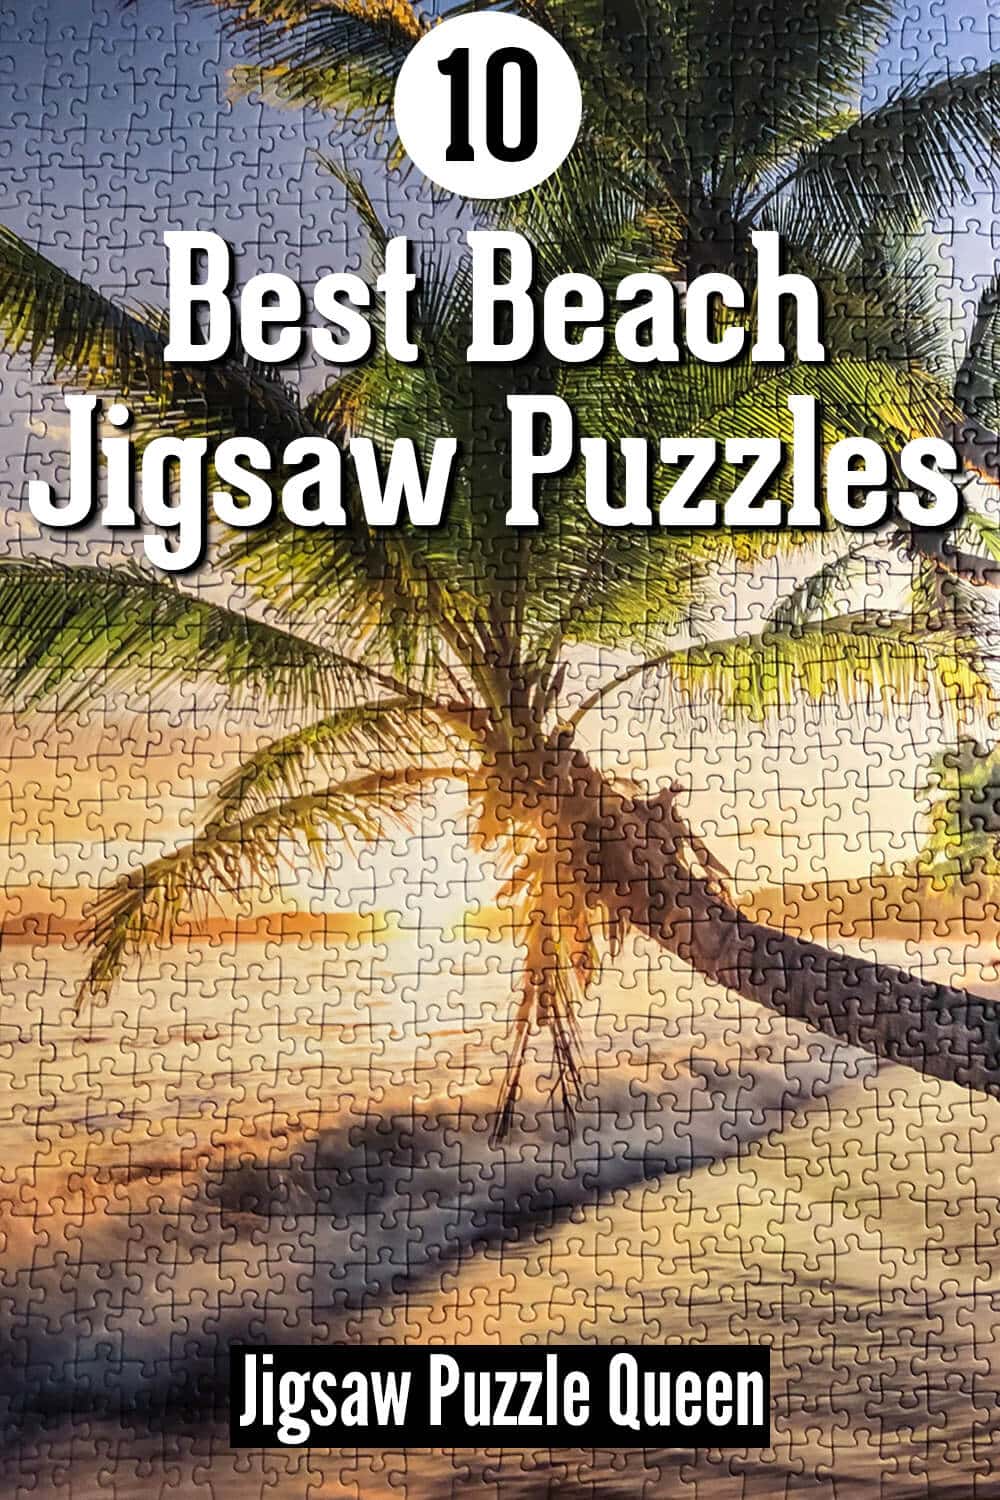 A finished puzzle with a text overlay: 10 Best Beach Jigsaw Puzzles